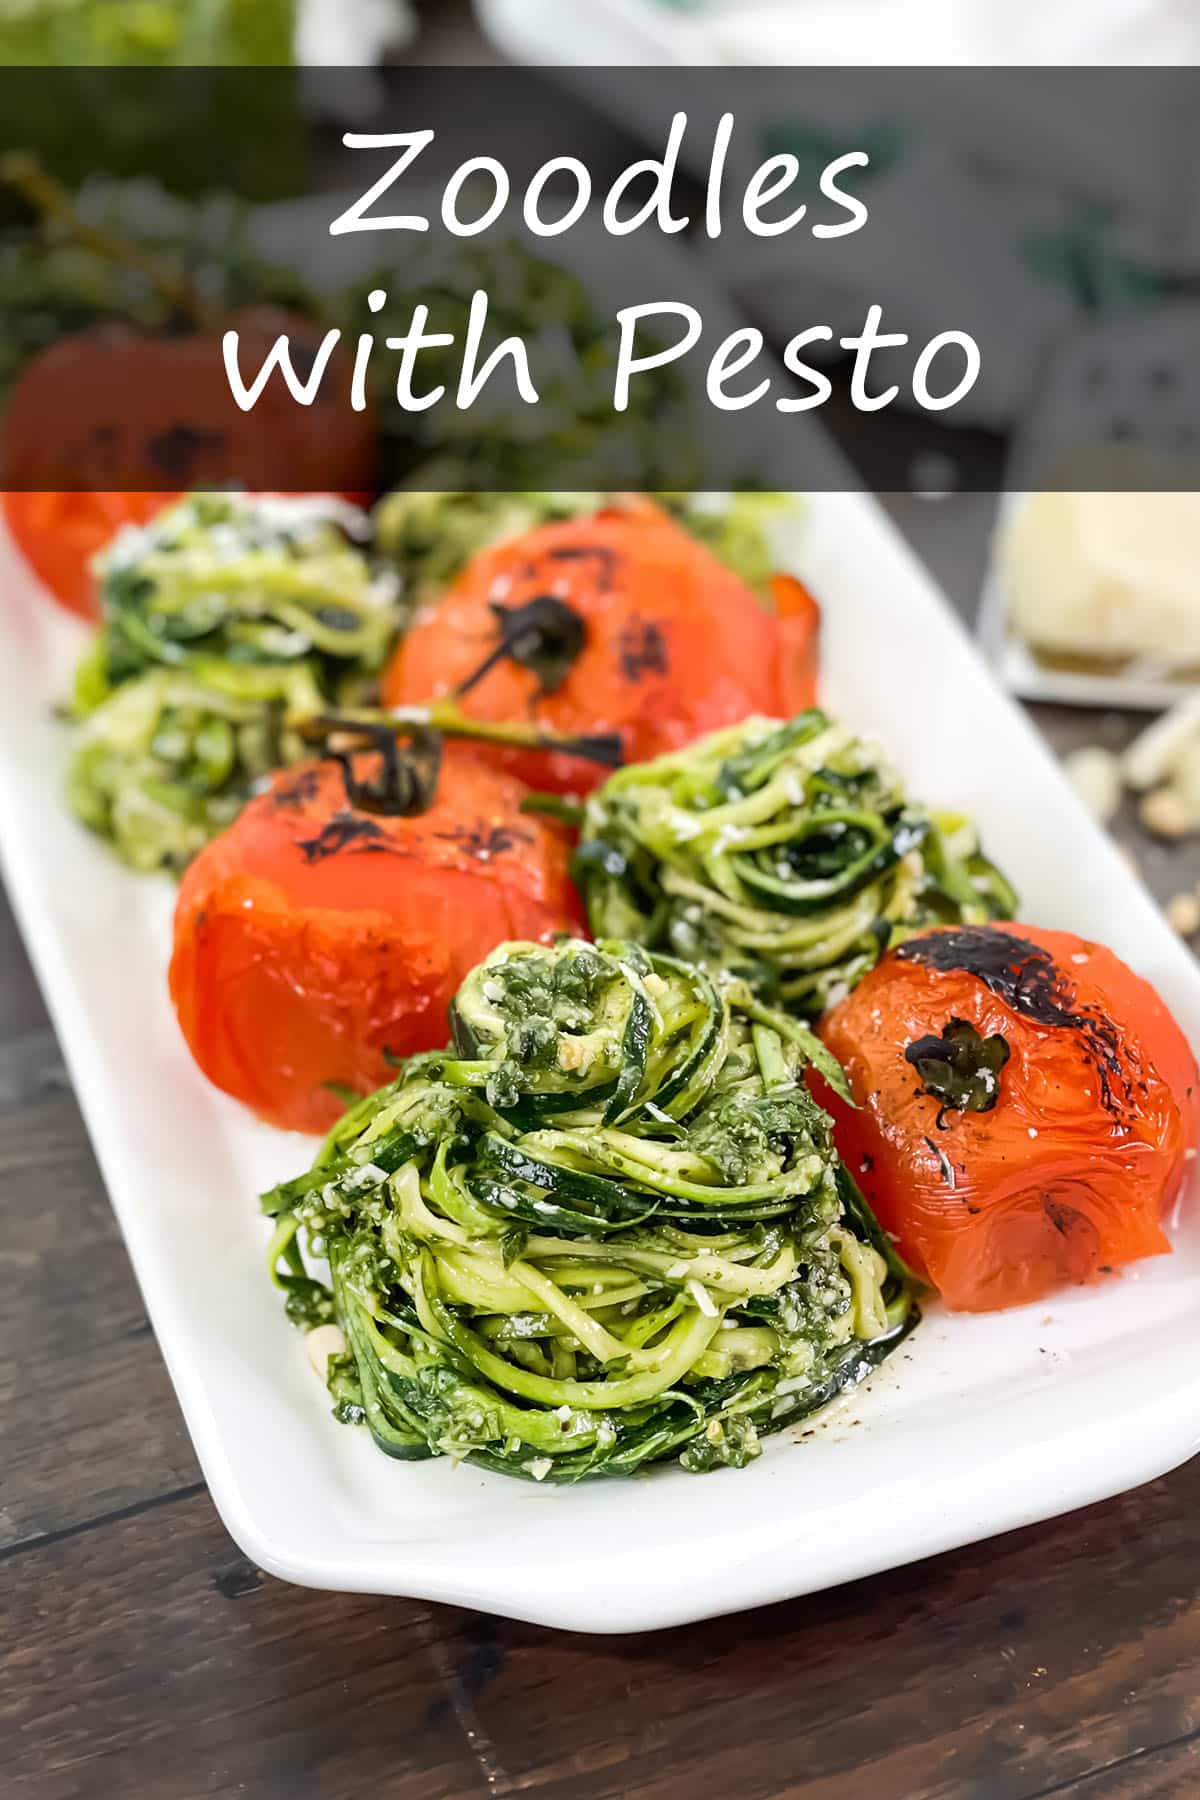 Zoodles with Pesto